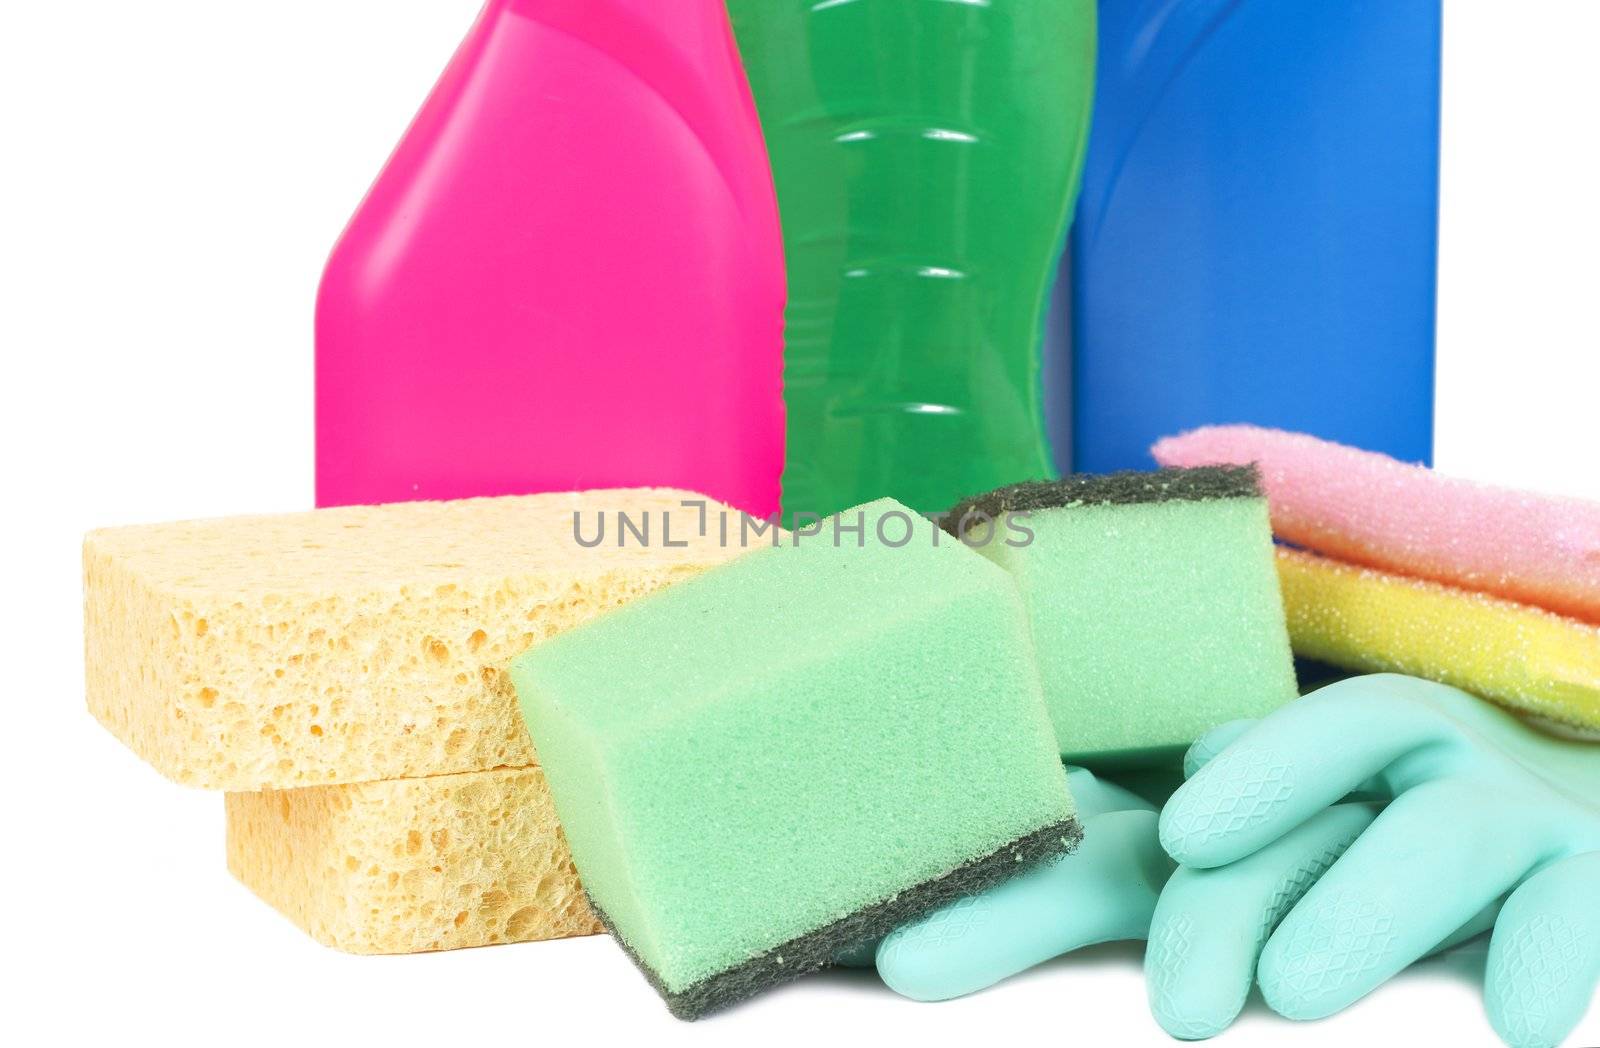 Variety of cleaning products such as sponges, gloves, and bottles with chemicals isolated on white background